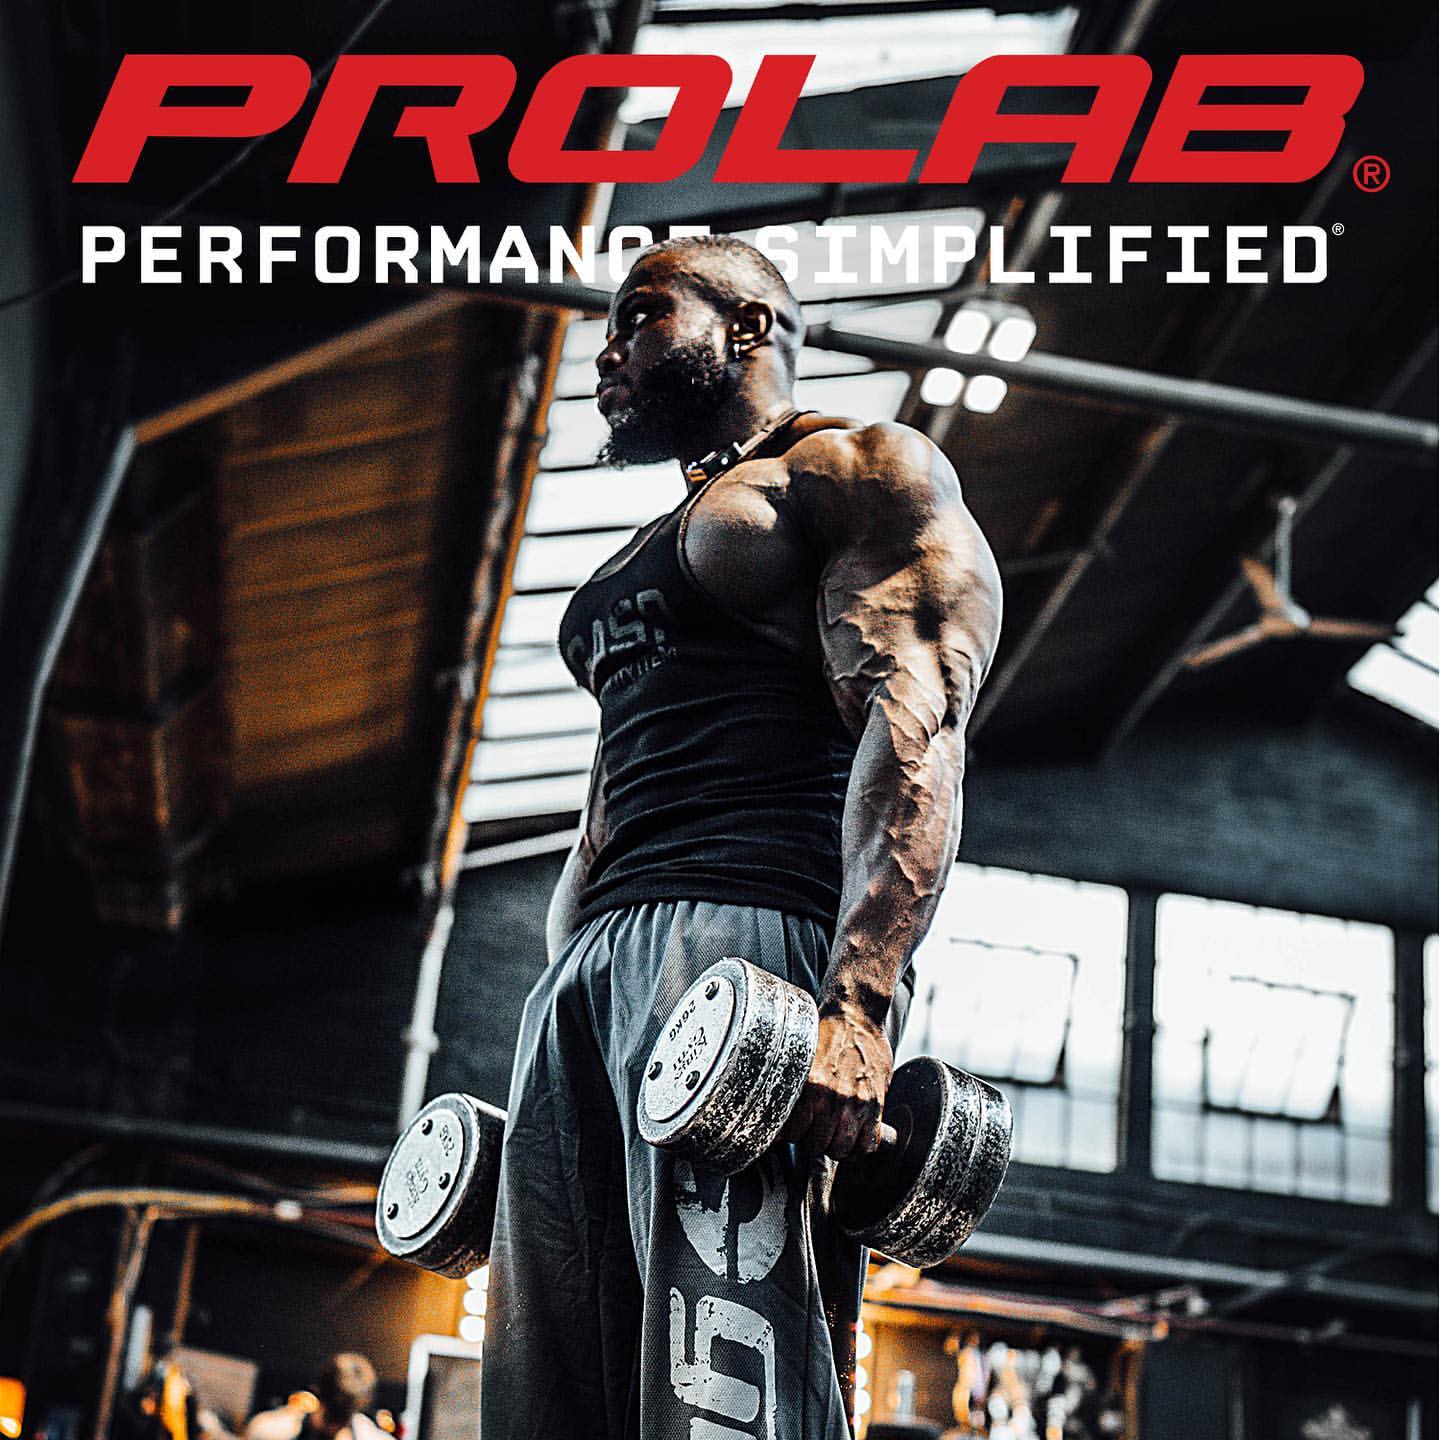 PROLAB 100% Whey Isolate Protein Powder, Build Lean Muscle Mass